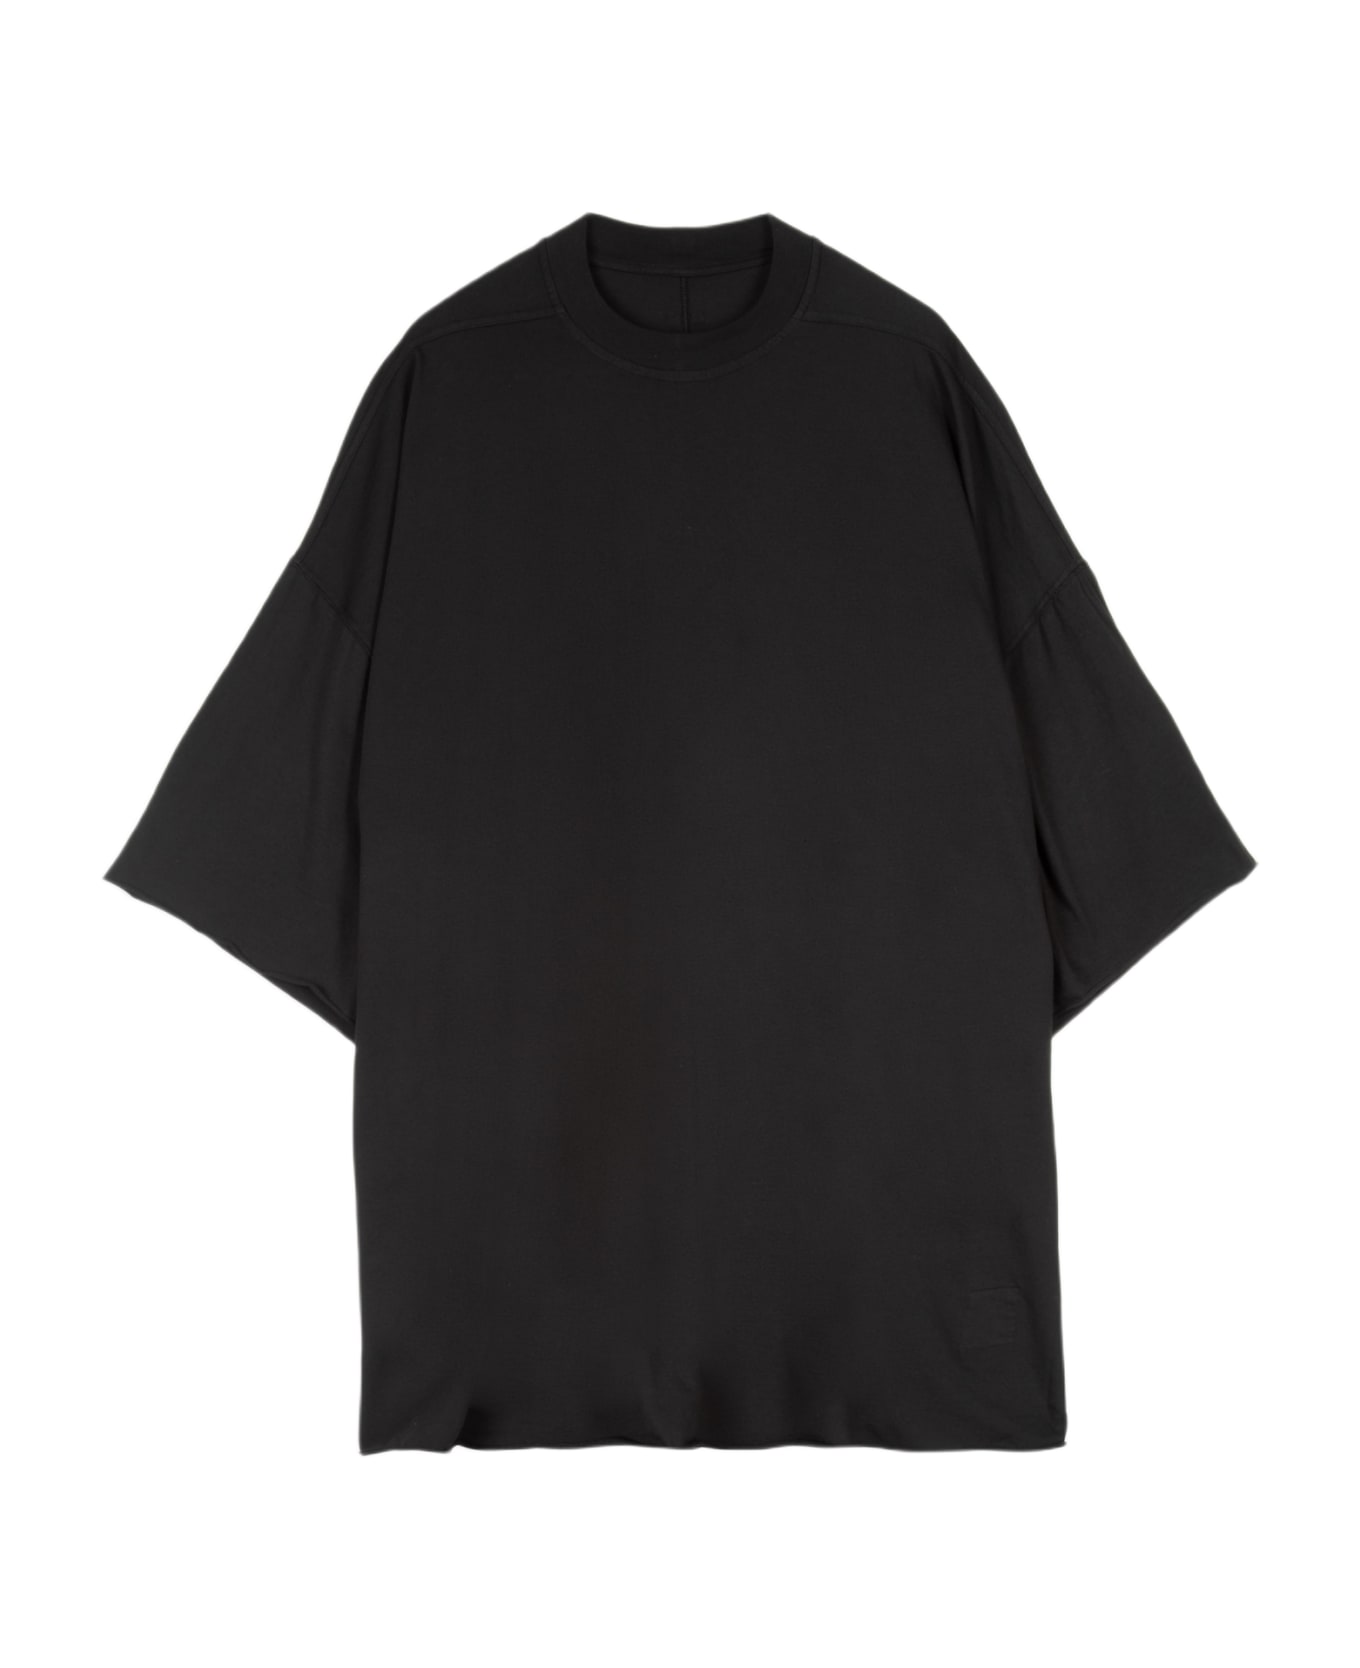 DRKSHDW Tommy T Black Cotton Oversized T-shirt With Raw-cut Hems - Tommy T - BLACK